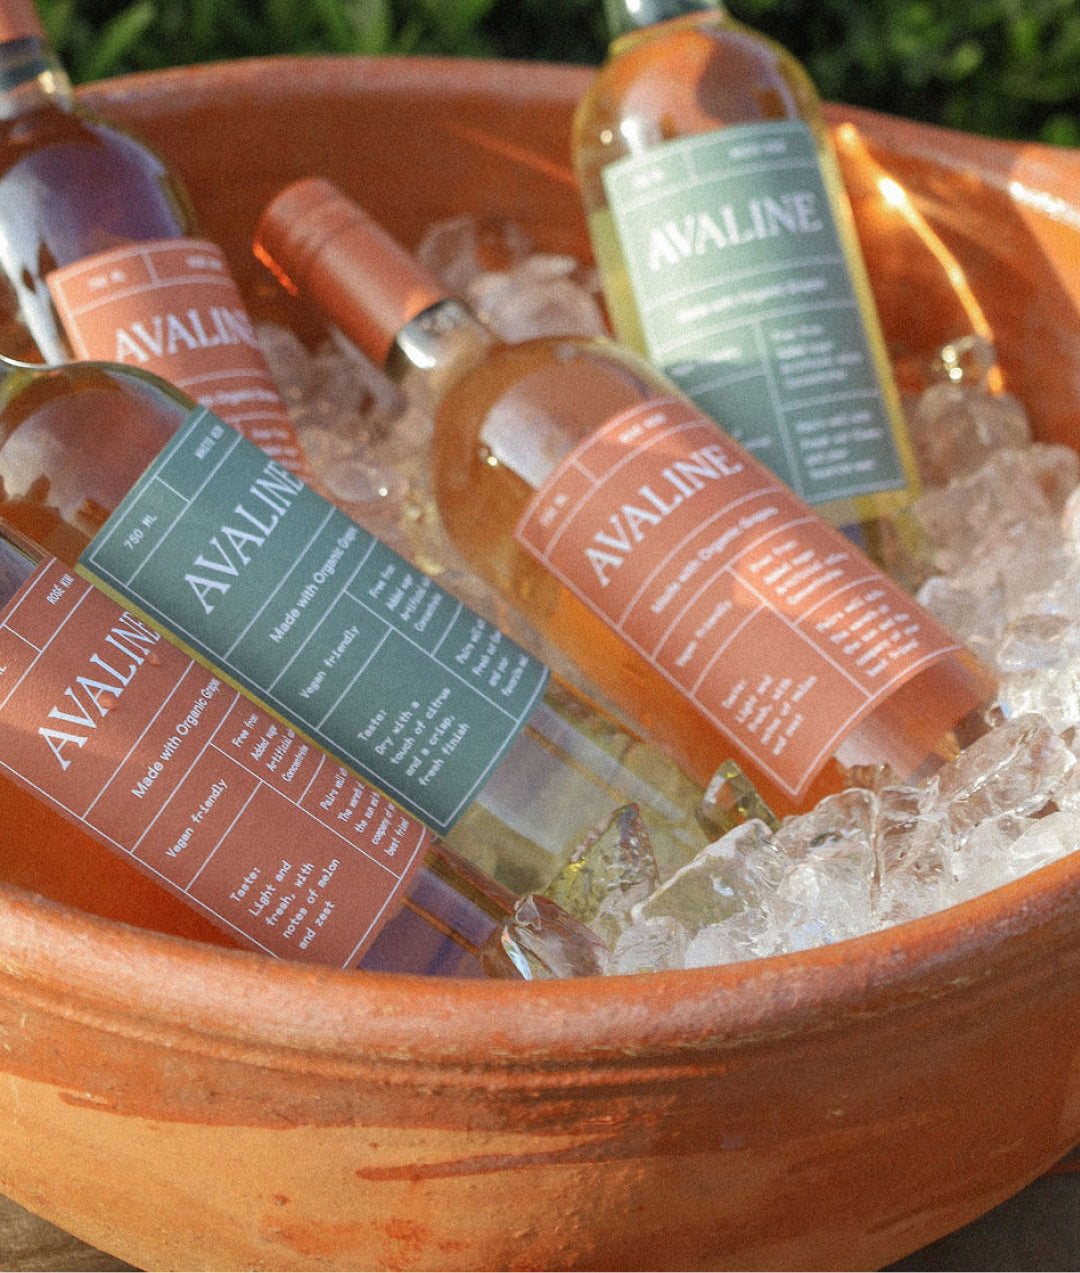 An image of Avaline White and Rosé bottles in a bucket surrounded by ice